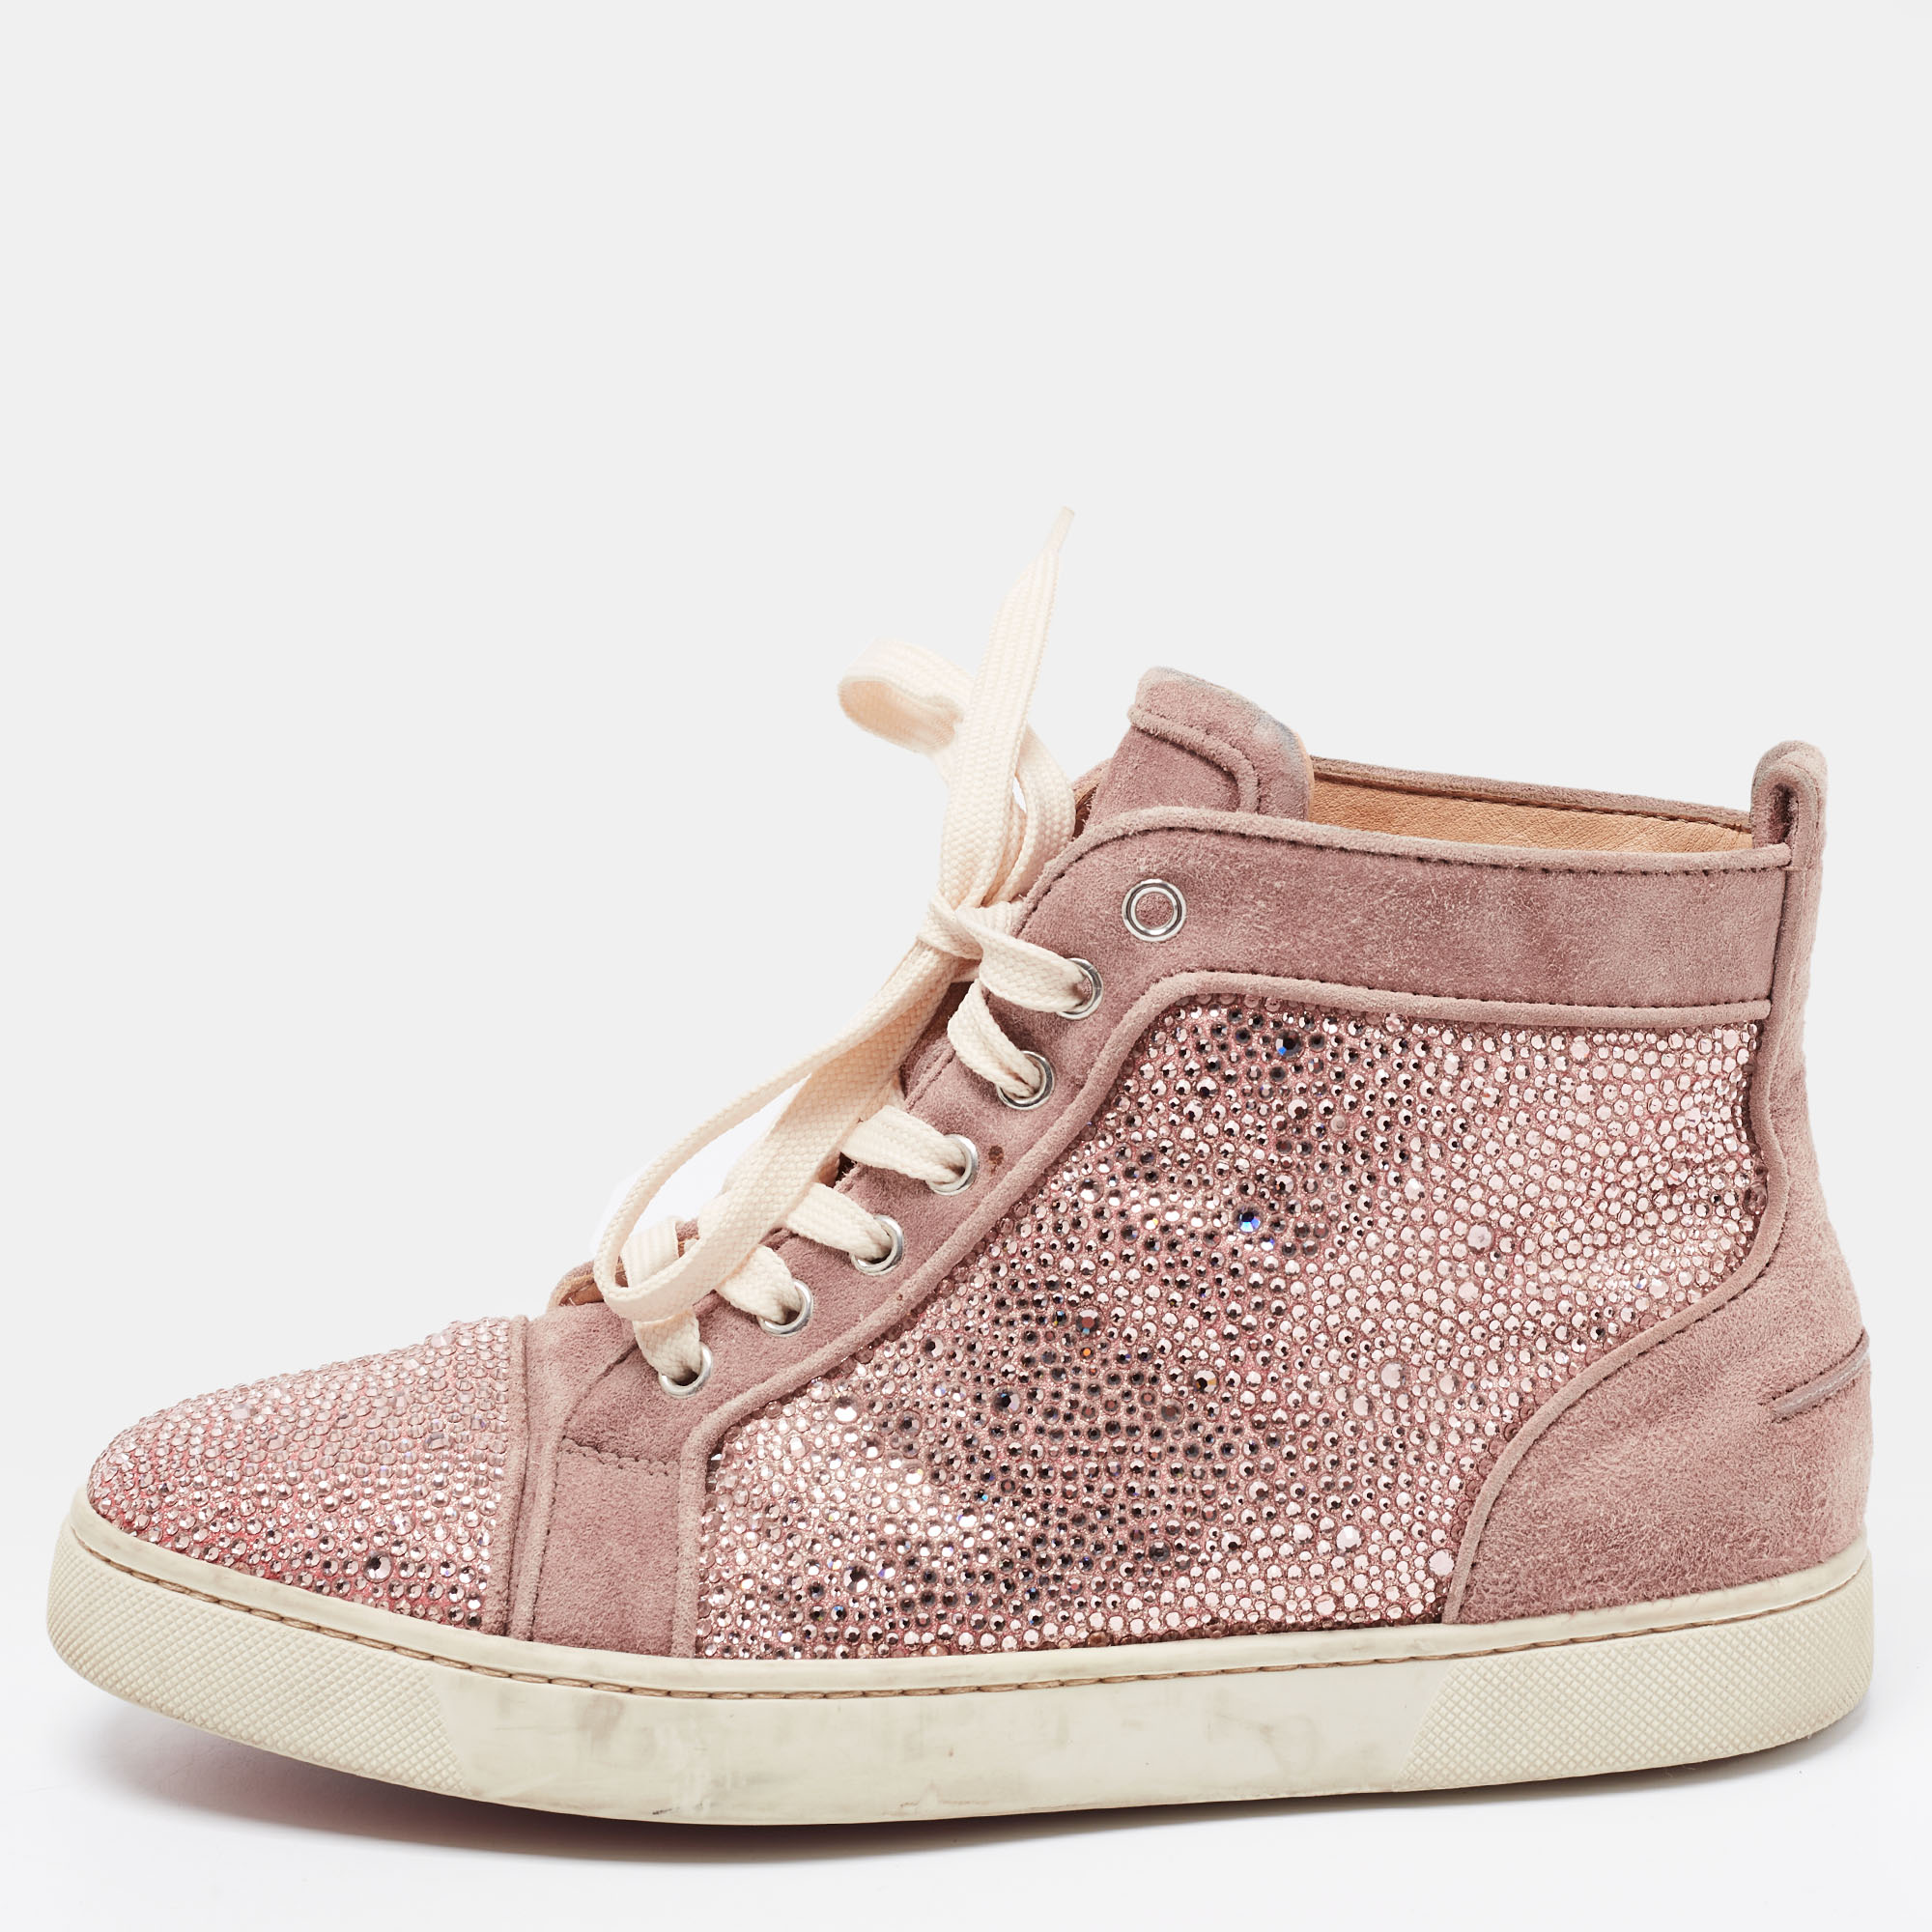 Pre-owned Christian Louboutin Pink Suede Louis Flat Strass High-top Sneakers Size 40